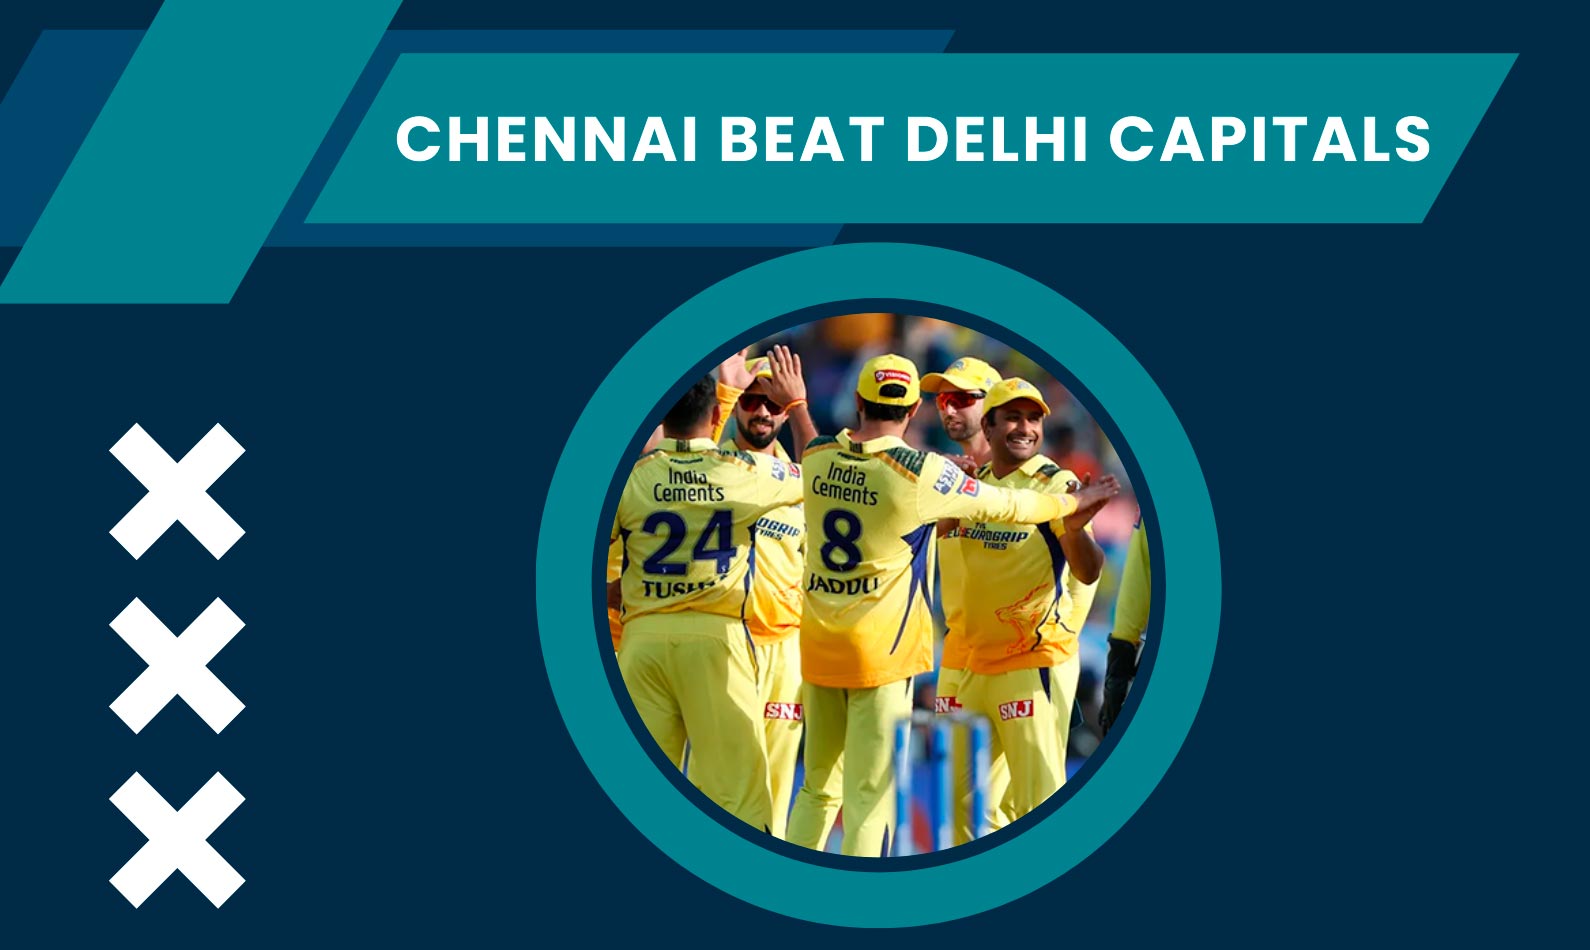 Chennai Finally Secured Their Place on Playoffs After a Thumping win Over Delhi Capitals